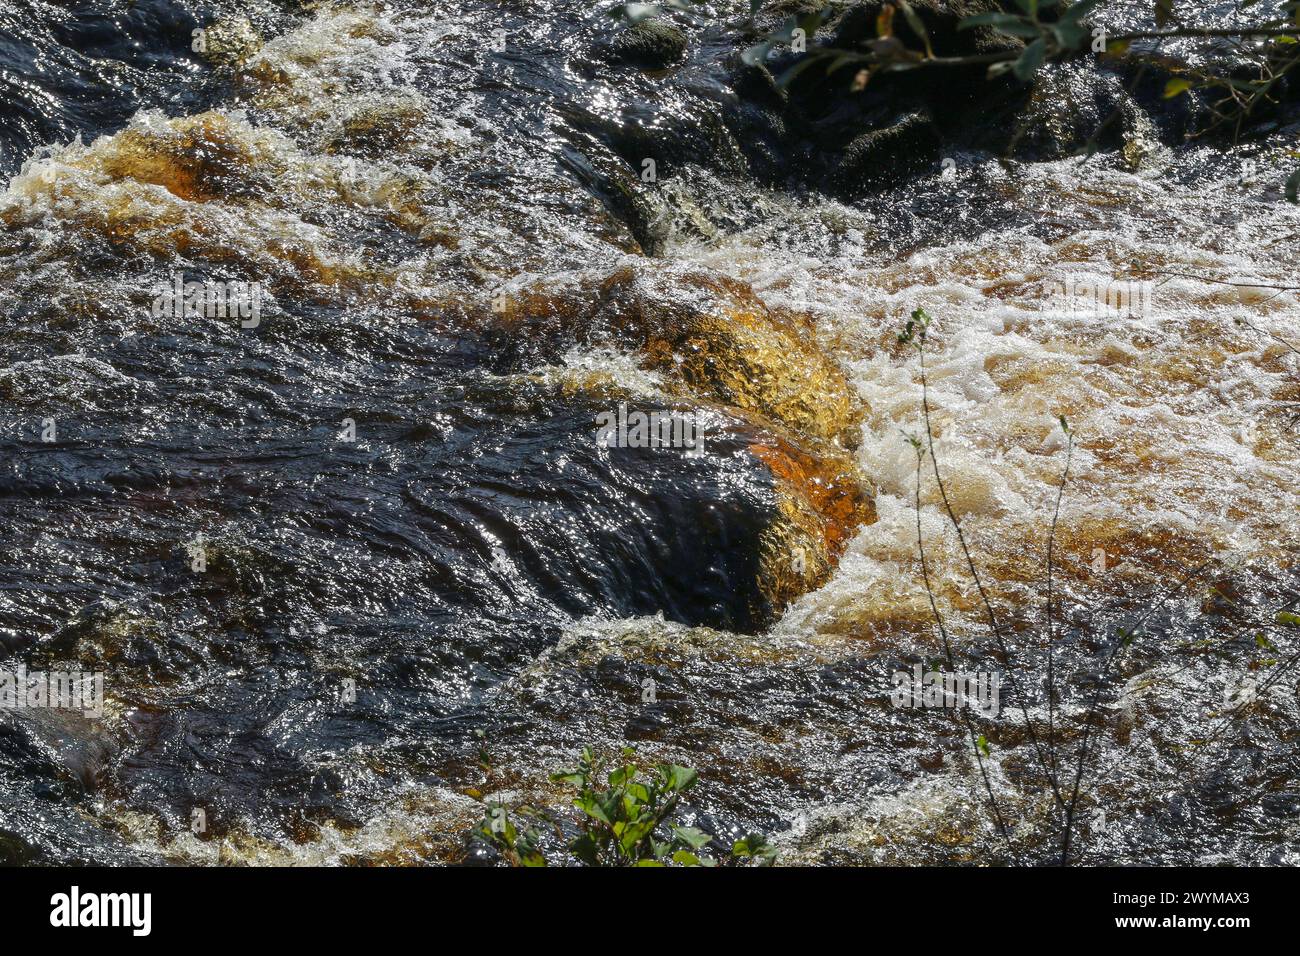 Peat river Ireland, peat-coloured water in River Glen a spate river south-west Donegal near Teelin. Stock Photo